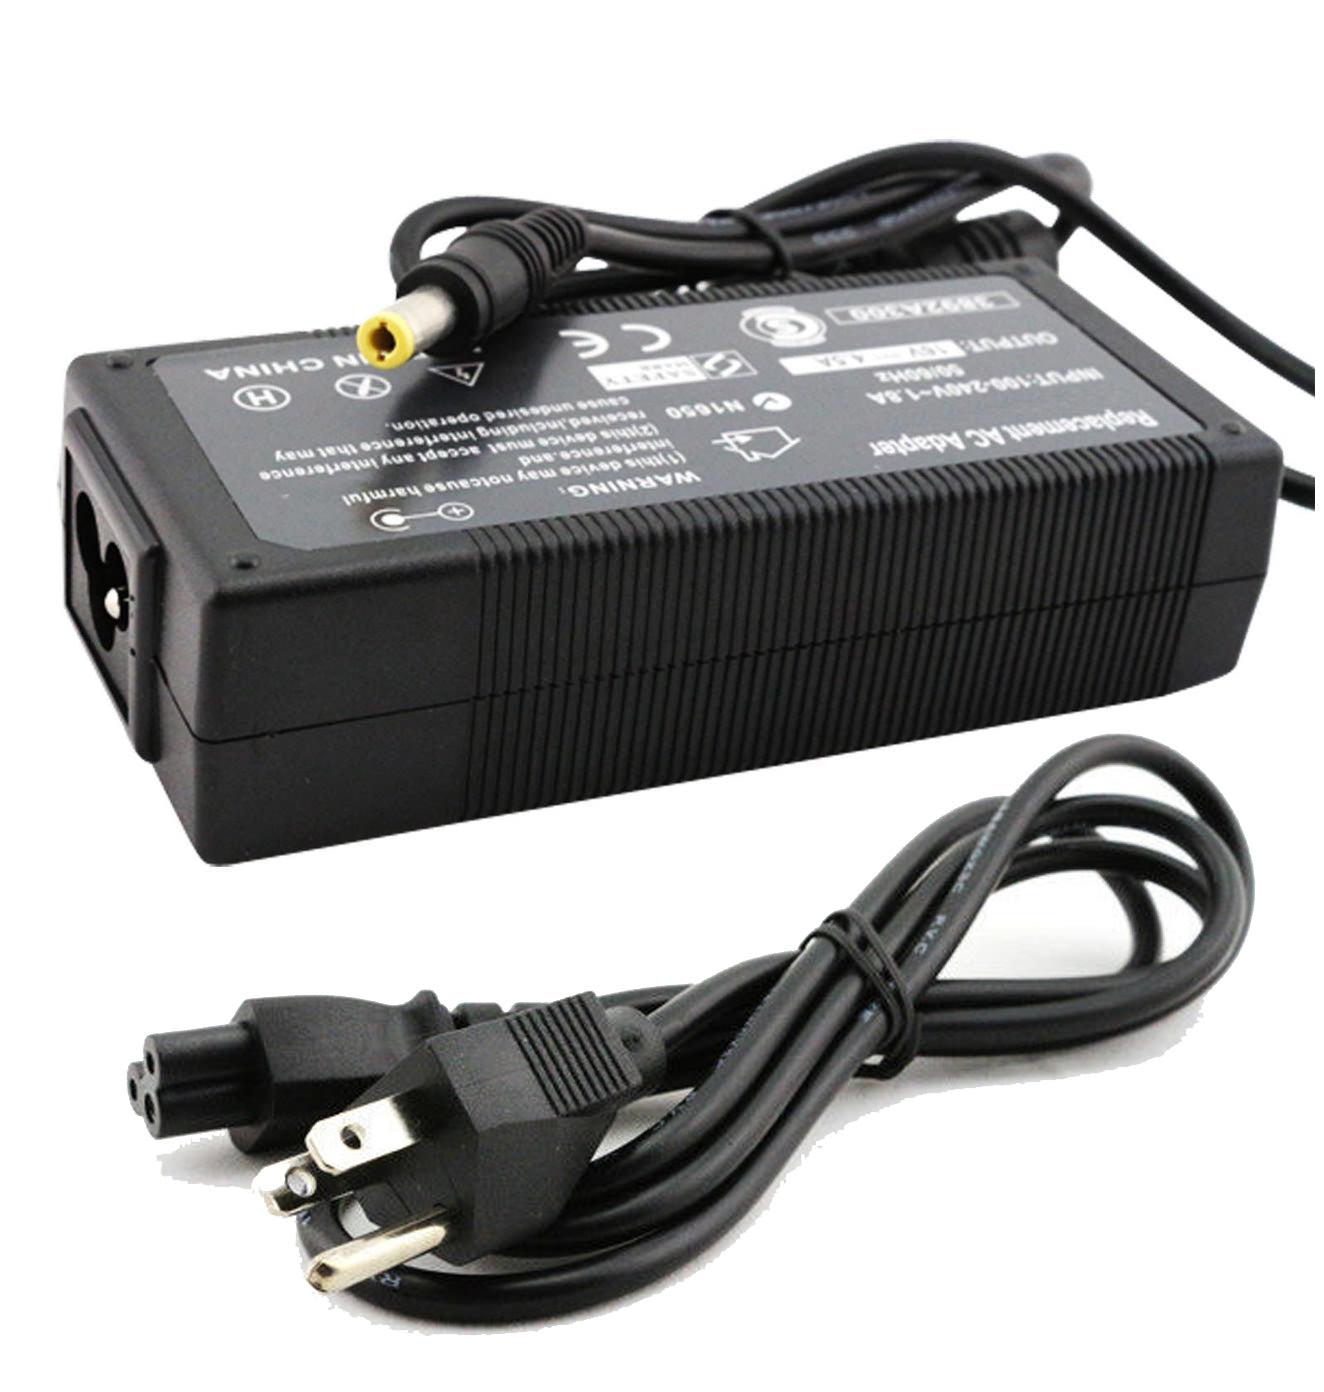 AC Adapter Charger for Panasonic Toughbook CF-F9 Notebook.